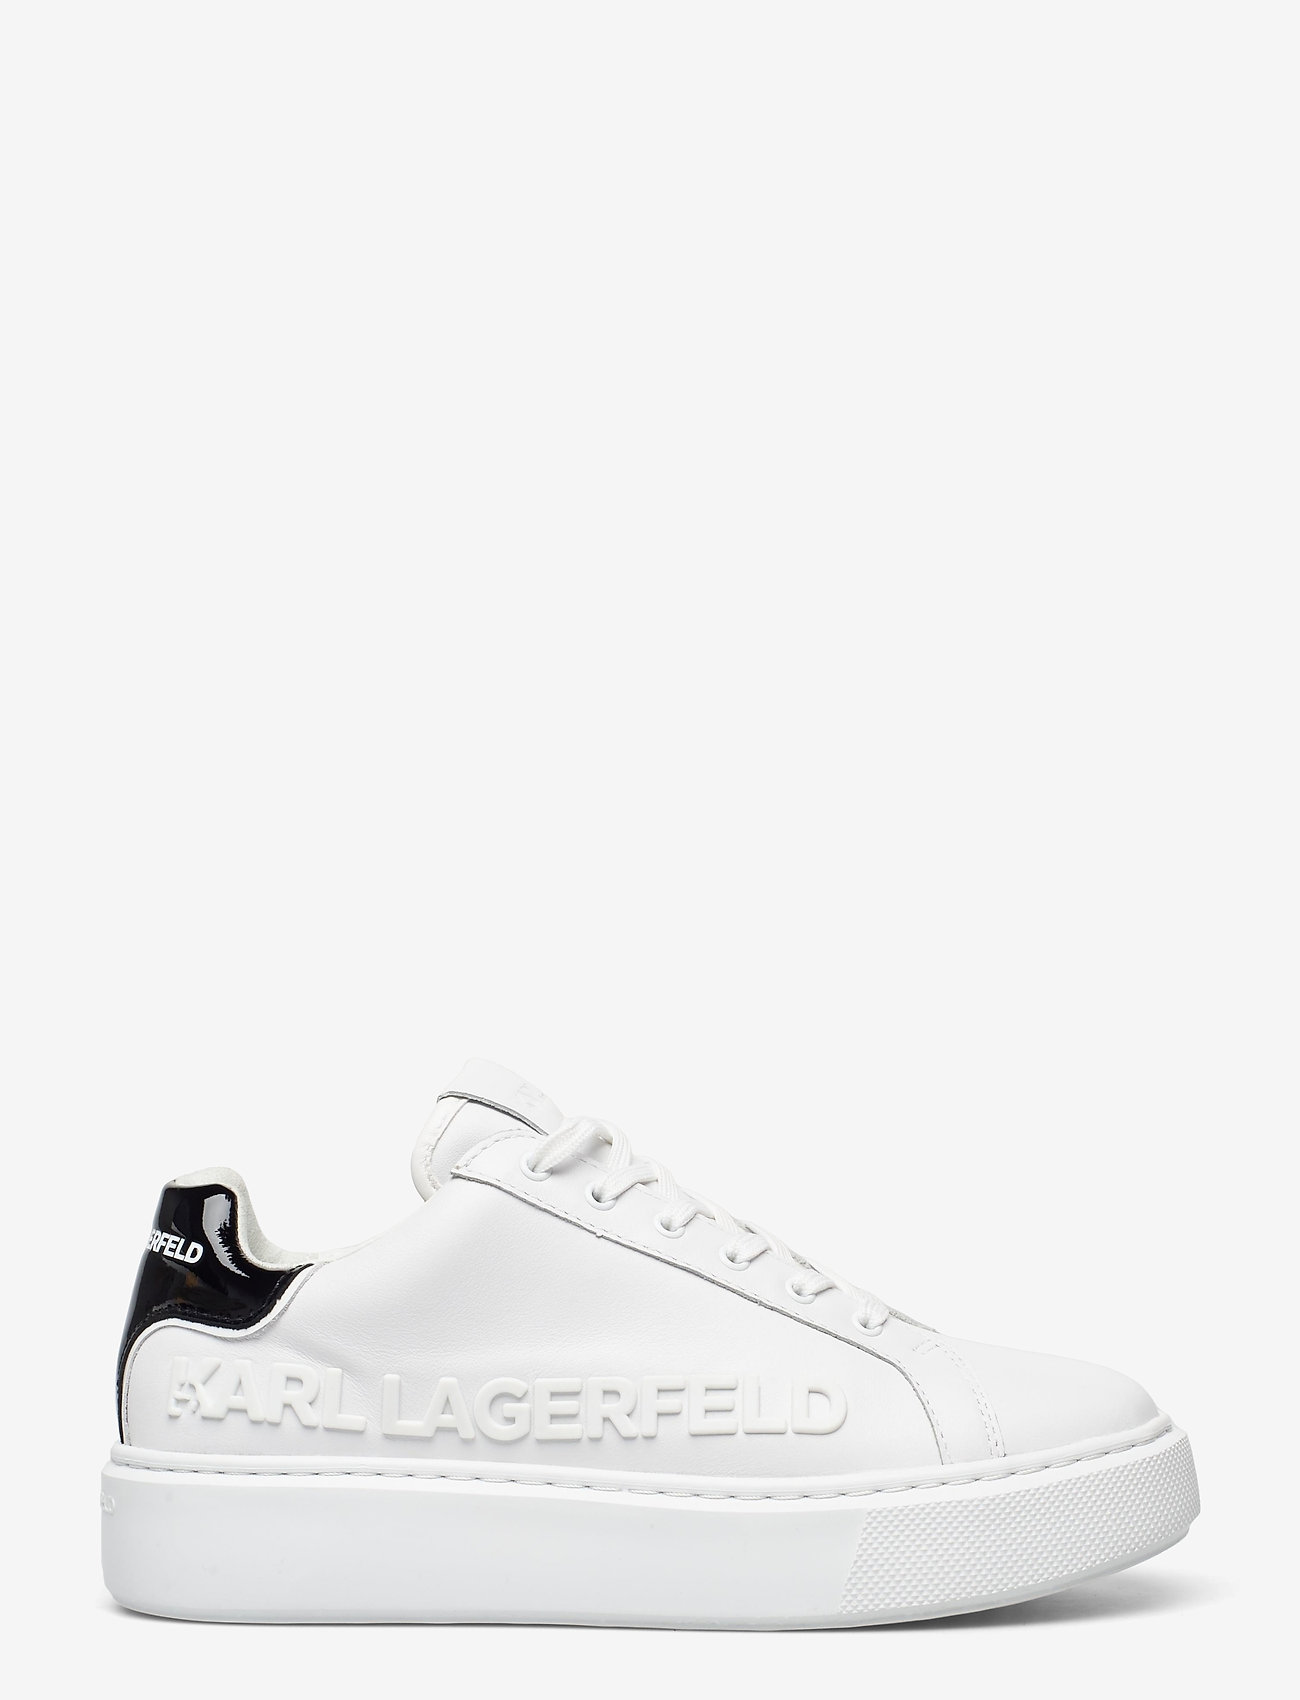 Karl Lagerfeld Shoes Maxi Kup - Low top sneakers | Boozt.com